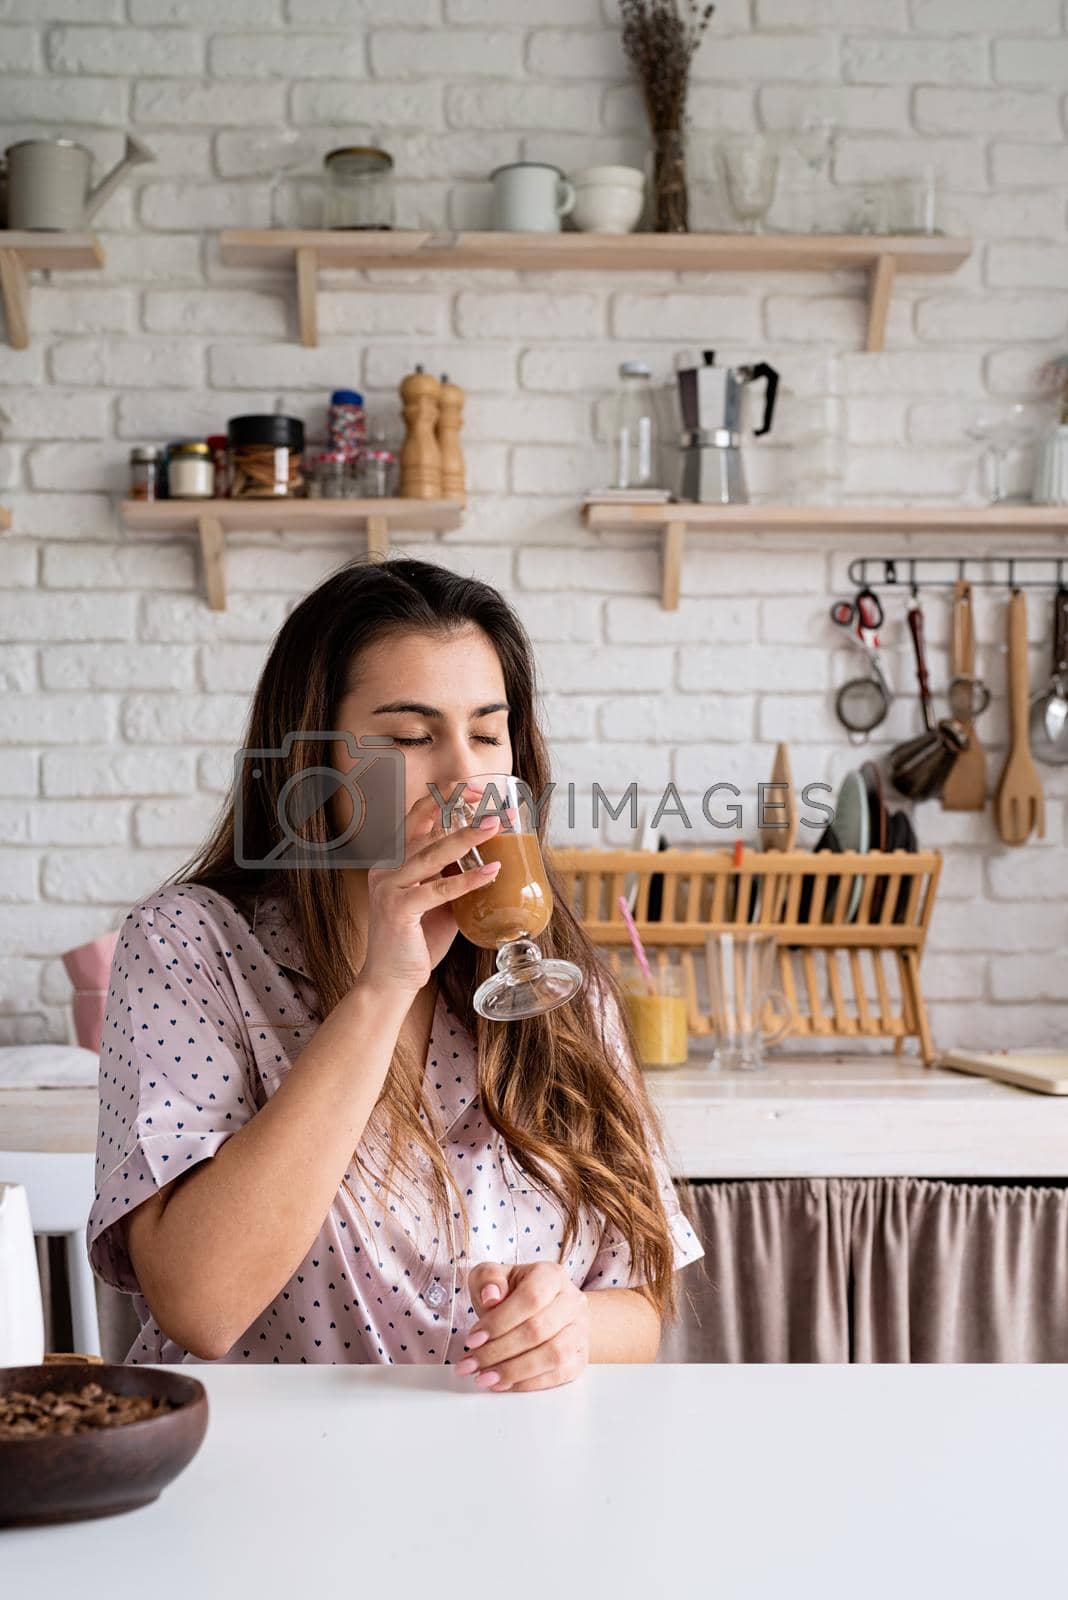 Royalty free image of young woman in lovely pajamas drinking coffee at home kitchen by Desperada